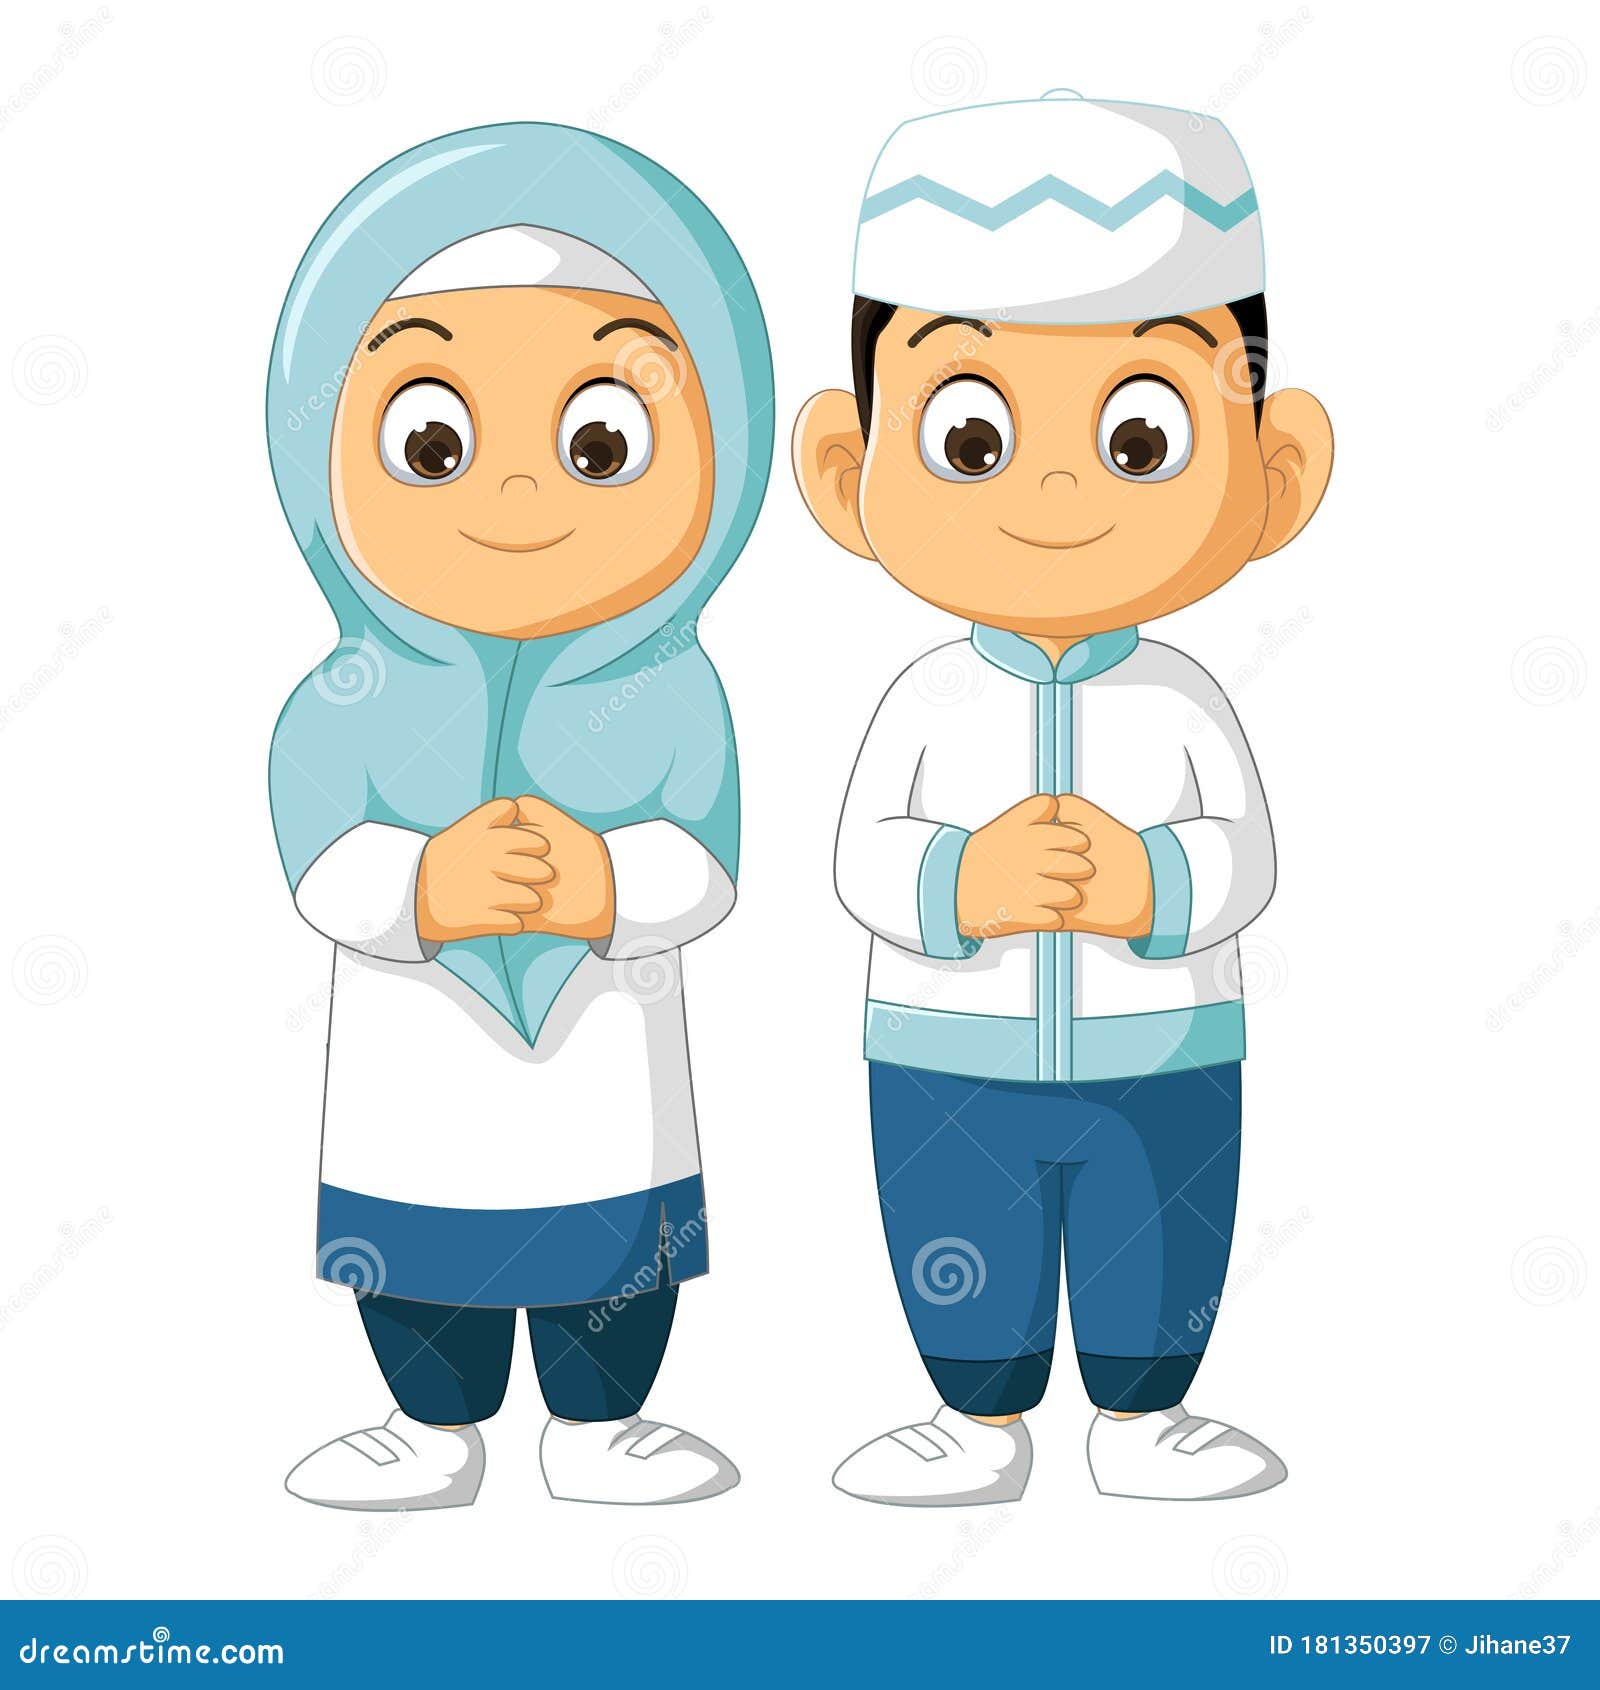 Muslim Little Couple Boy and Girl Cartoon Stock Vector - Illustration of  greeting, gradient: 181350397